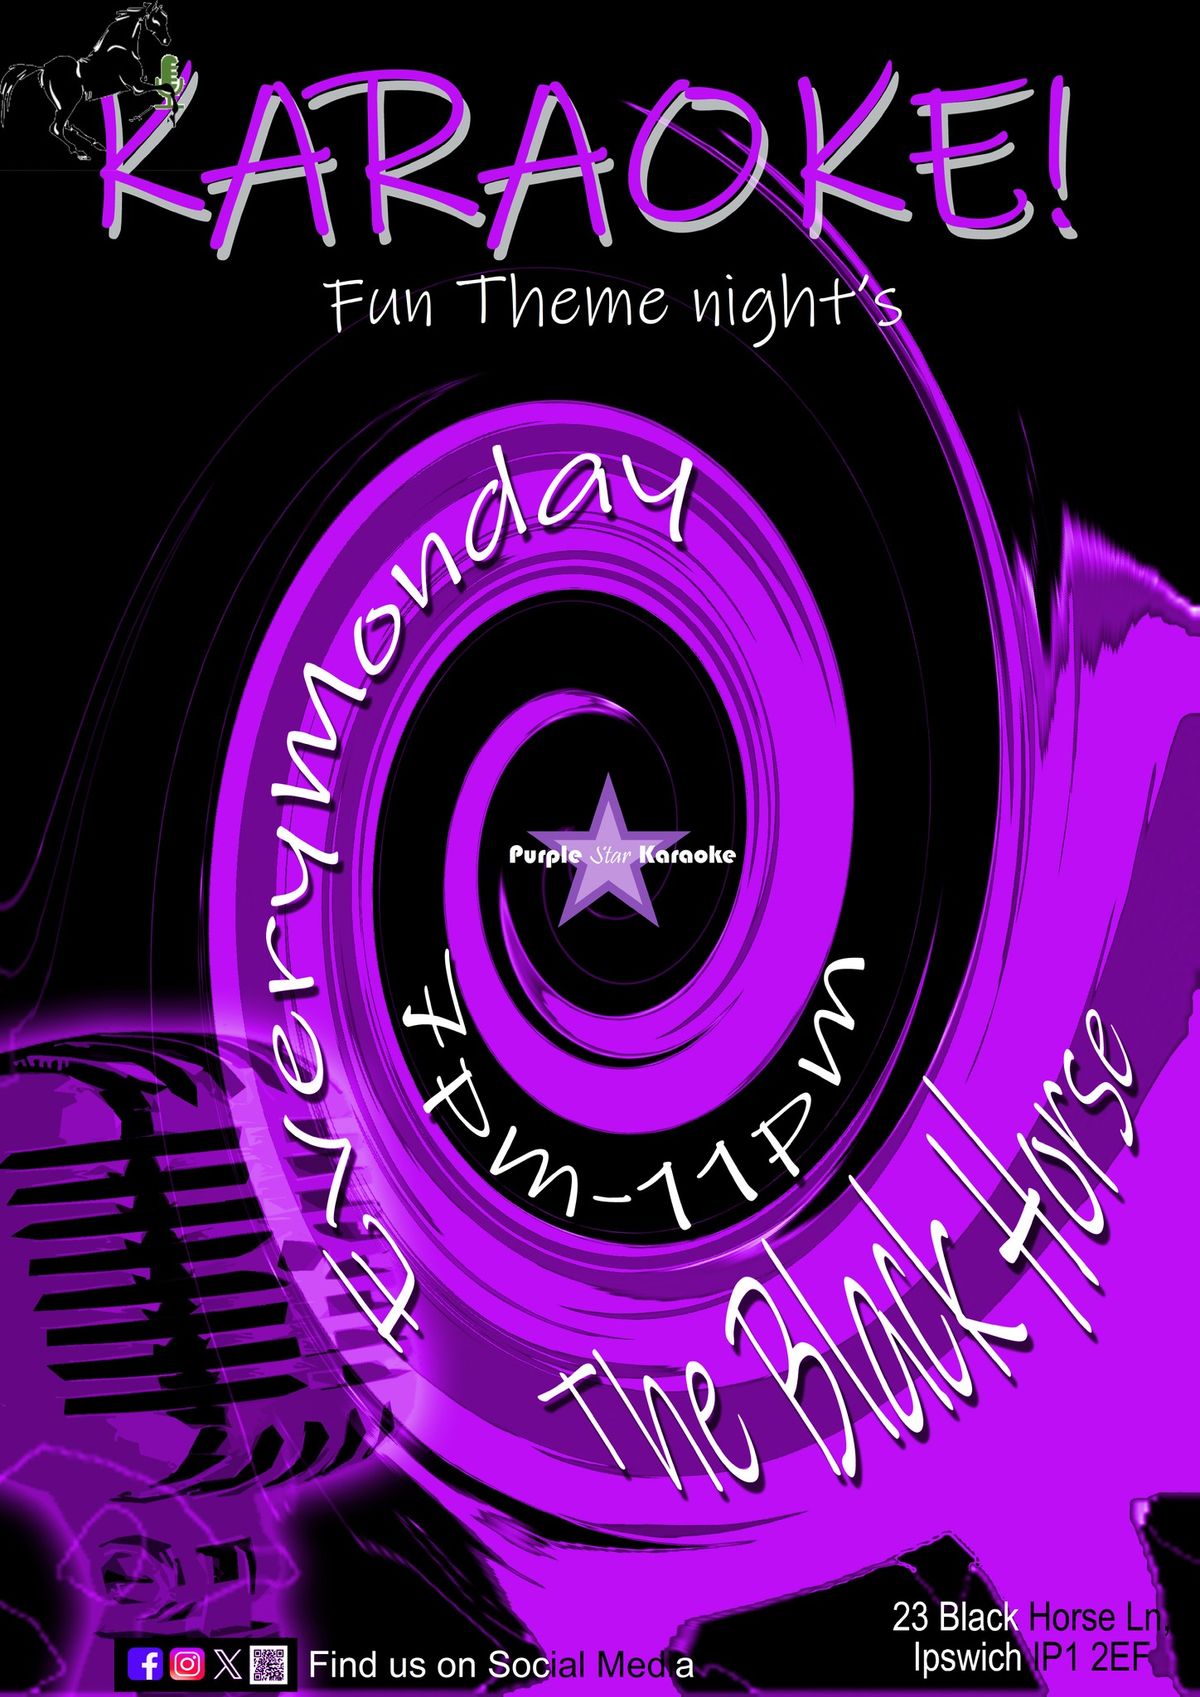  Karaoke @ The Black Horse, Ipswich (Novelty Songs with a First Name))